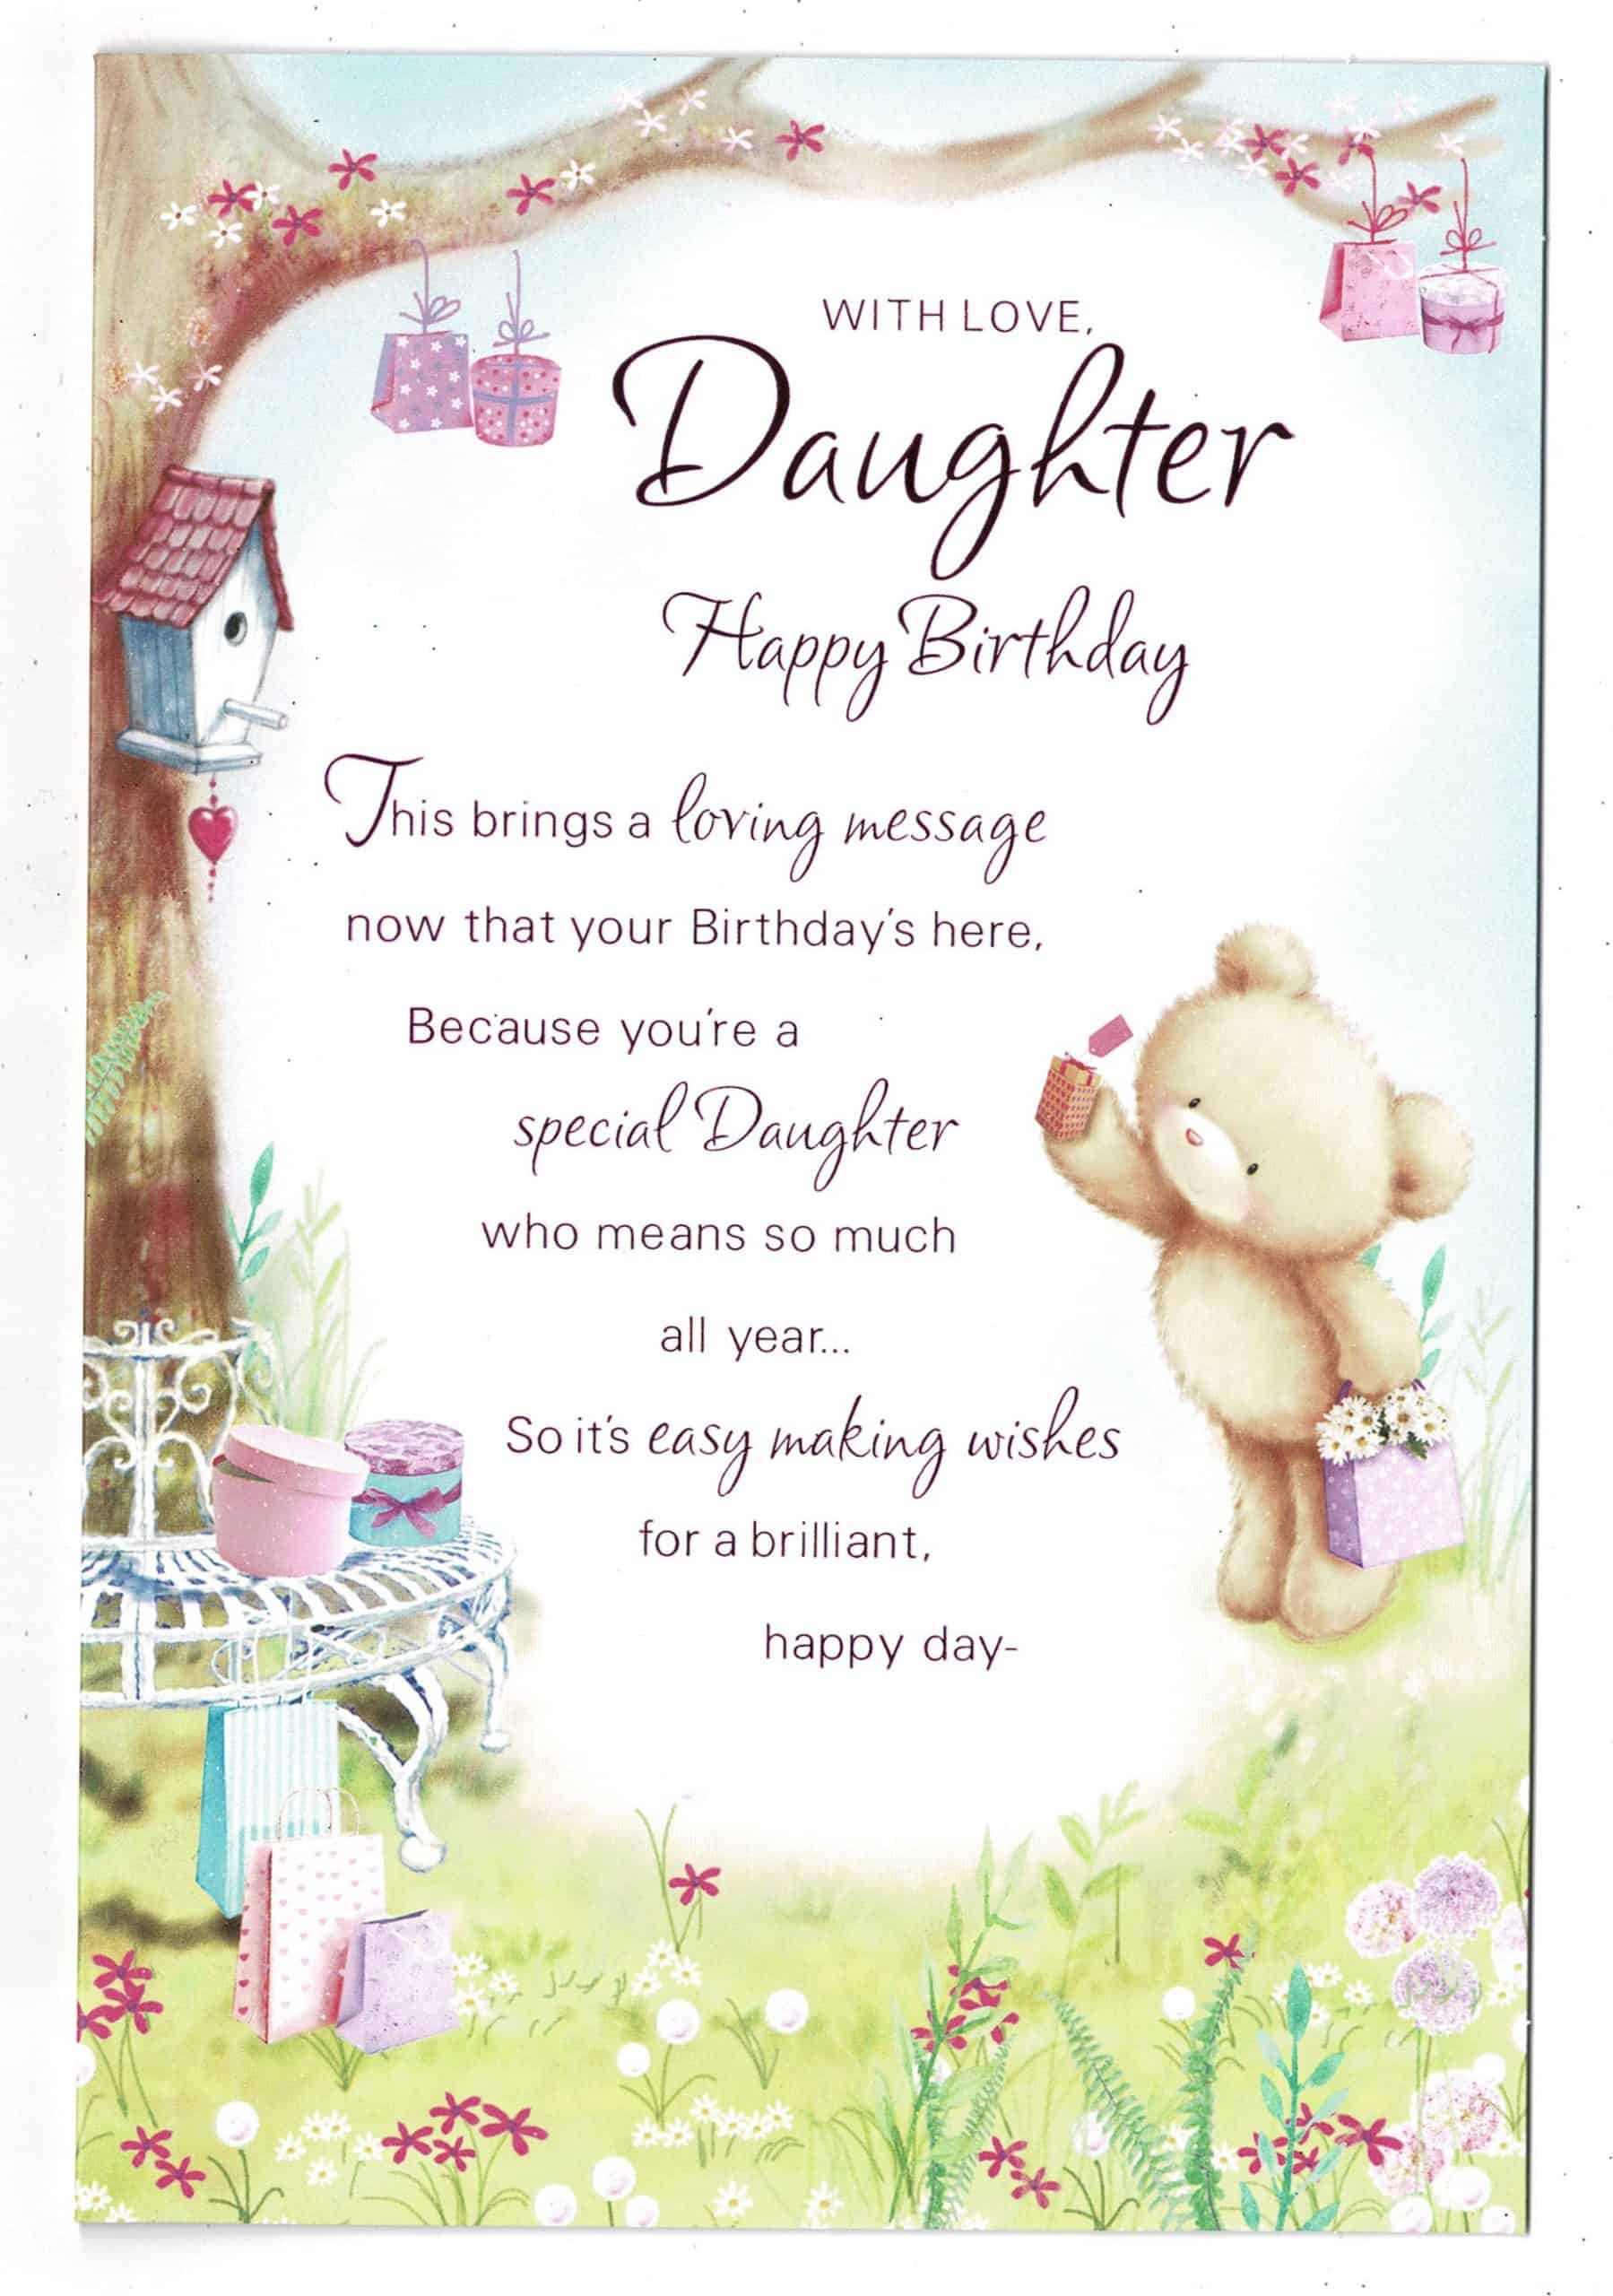 happy-birthday-daughter-poem-in-hindi-get-more-anythink-s